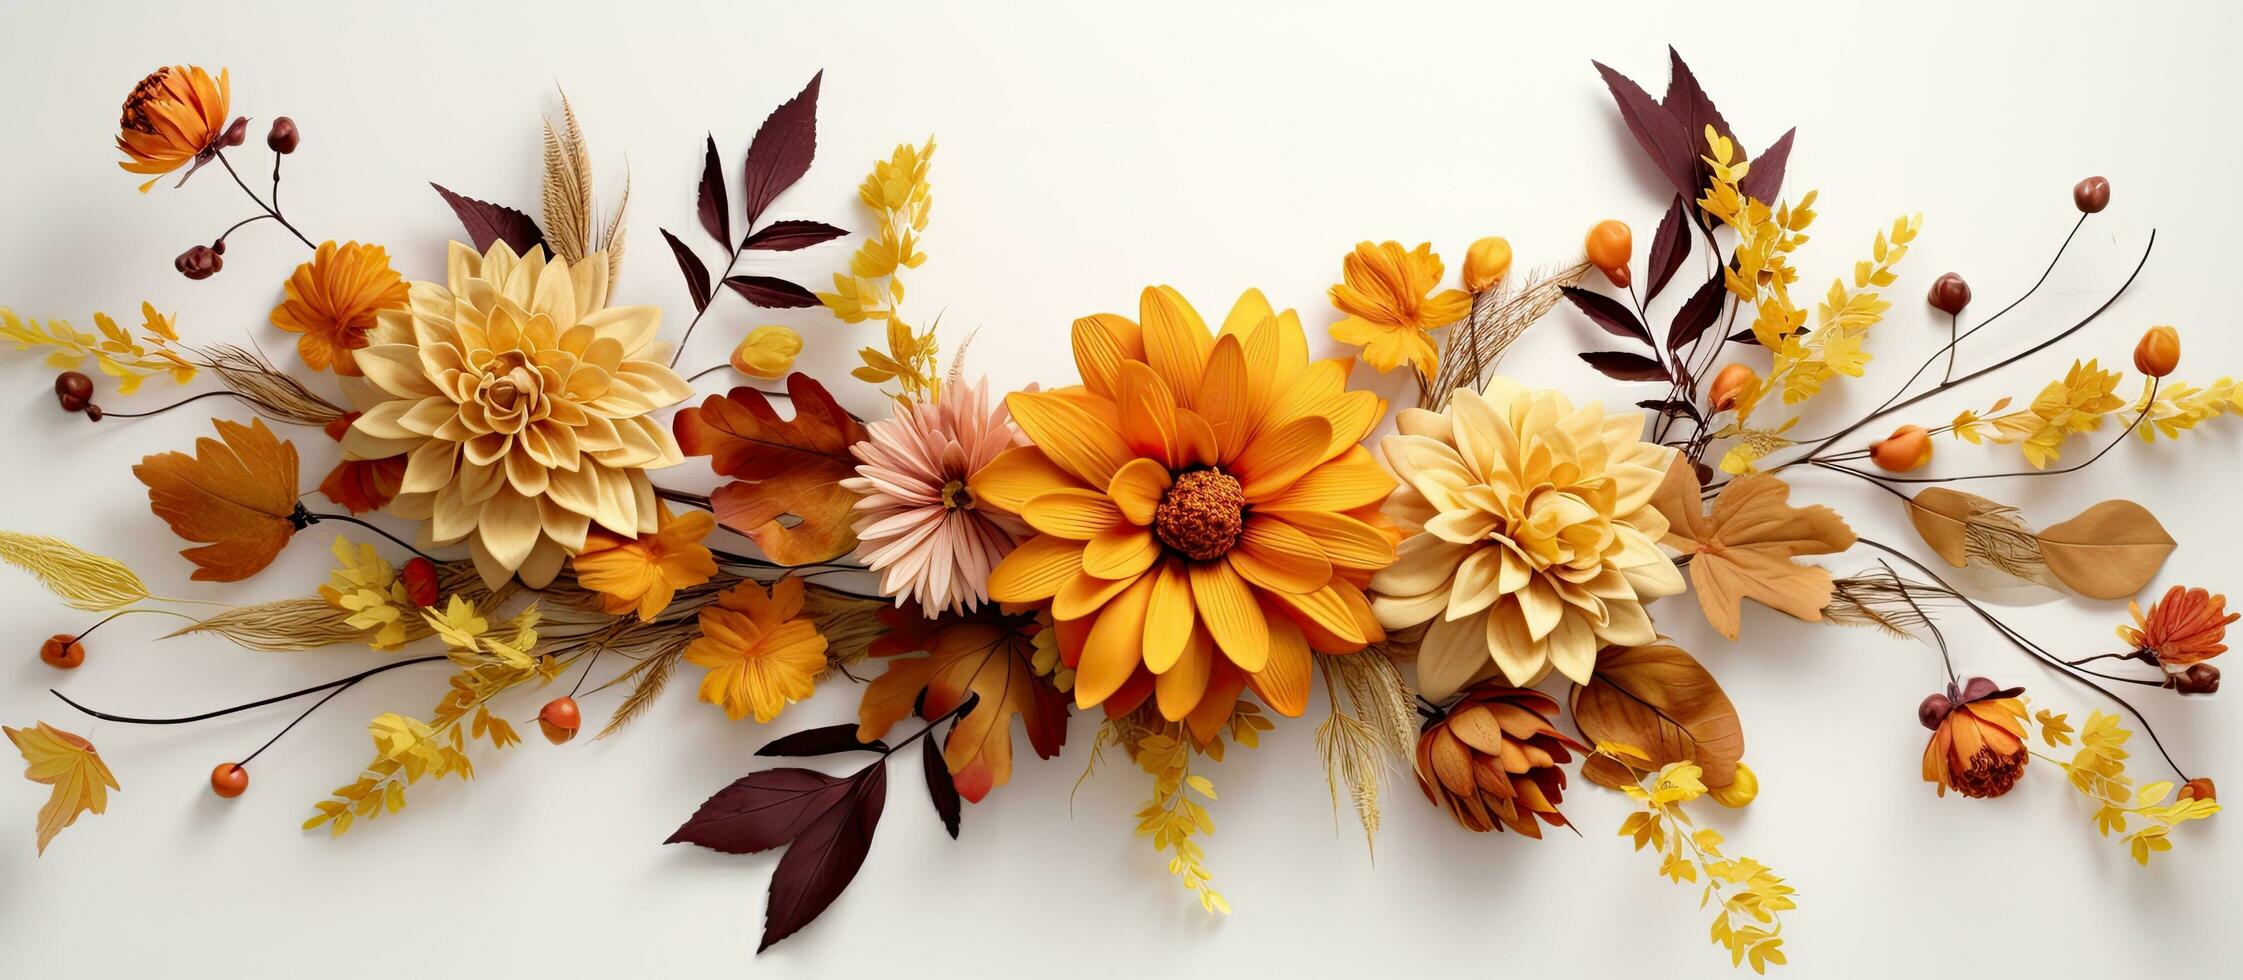 Fall flower arrangement on a pale background Floral decor Nature inspired backdrop photo